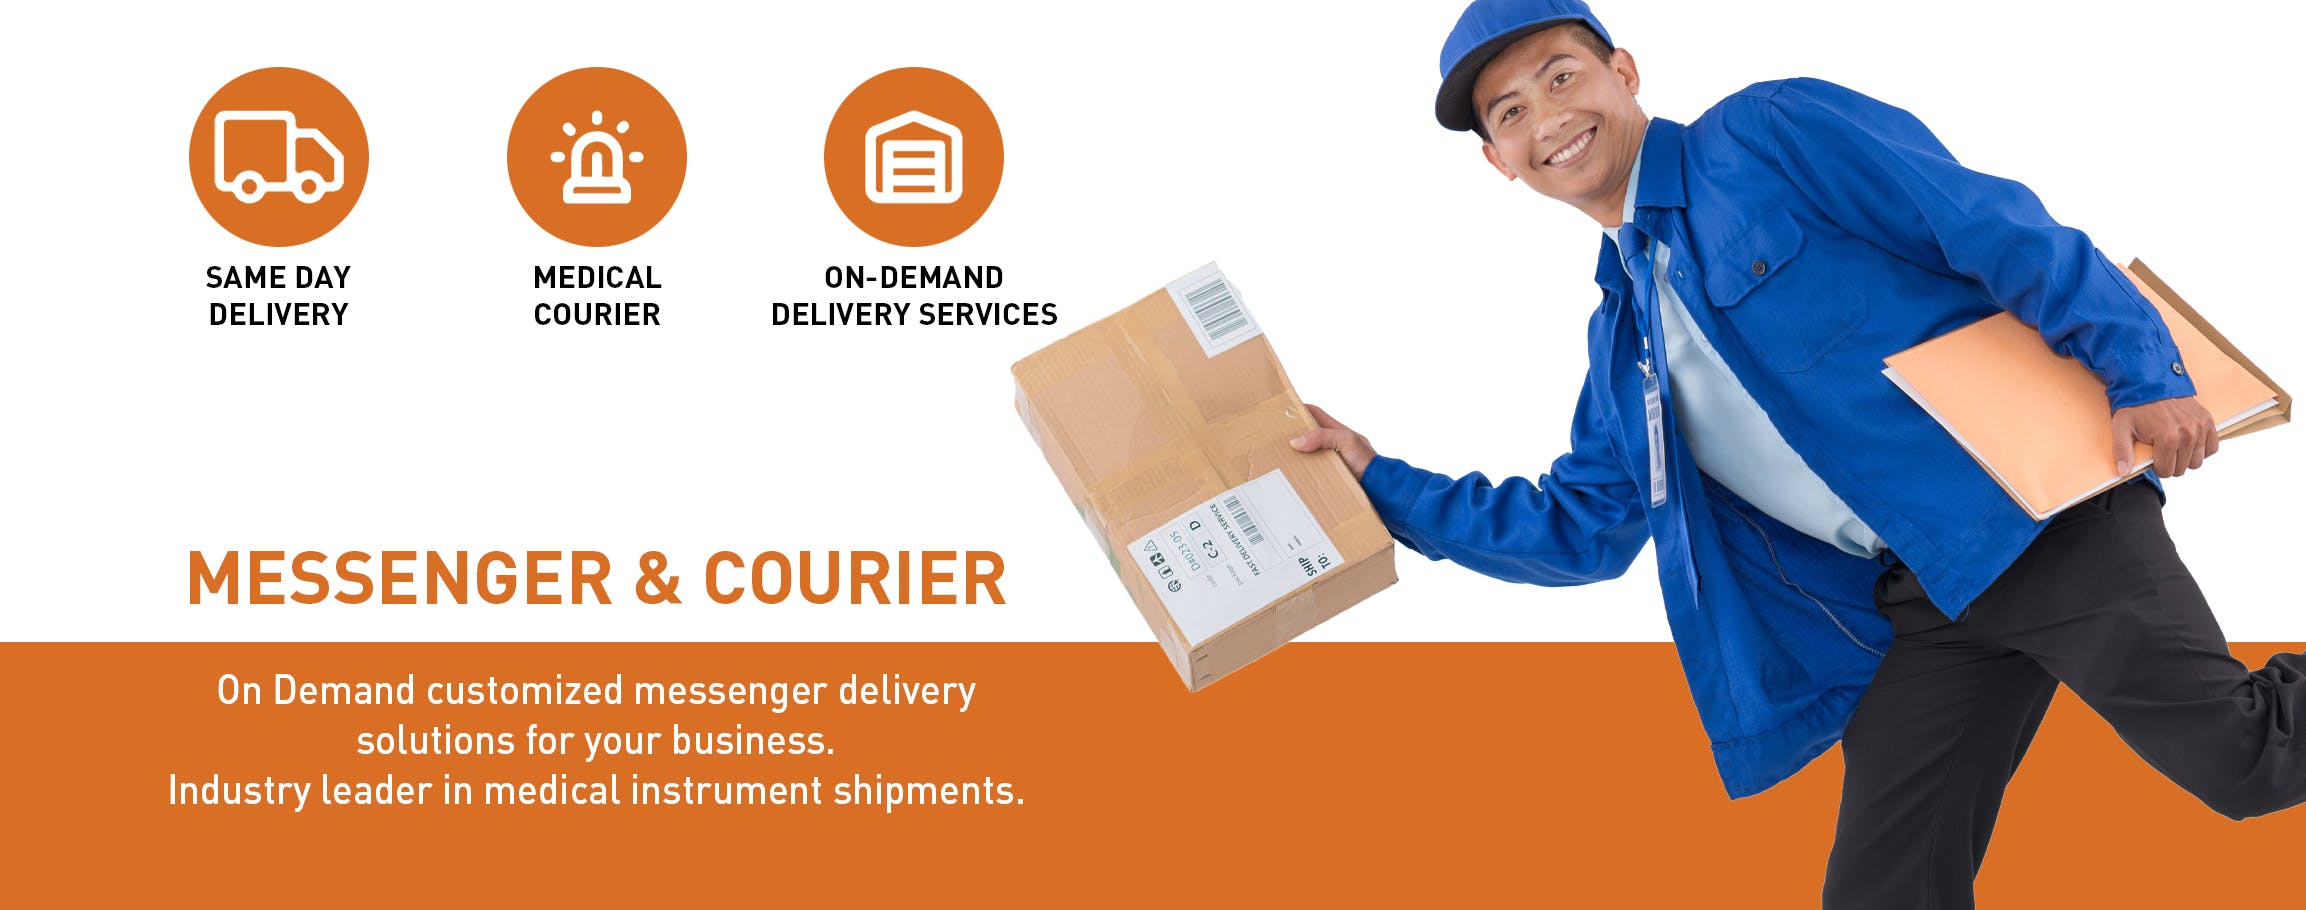 Ultimate Courier, On-Demand Courier Service